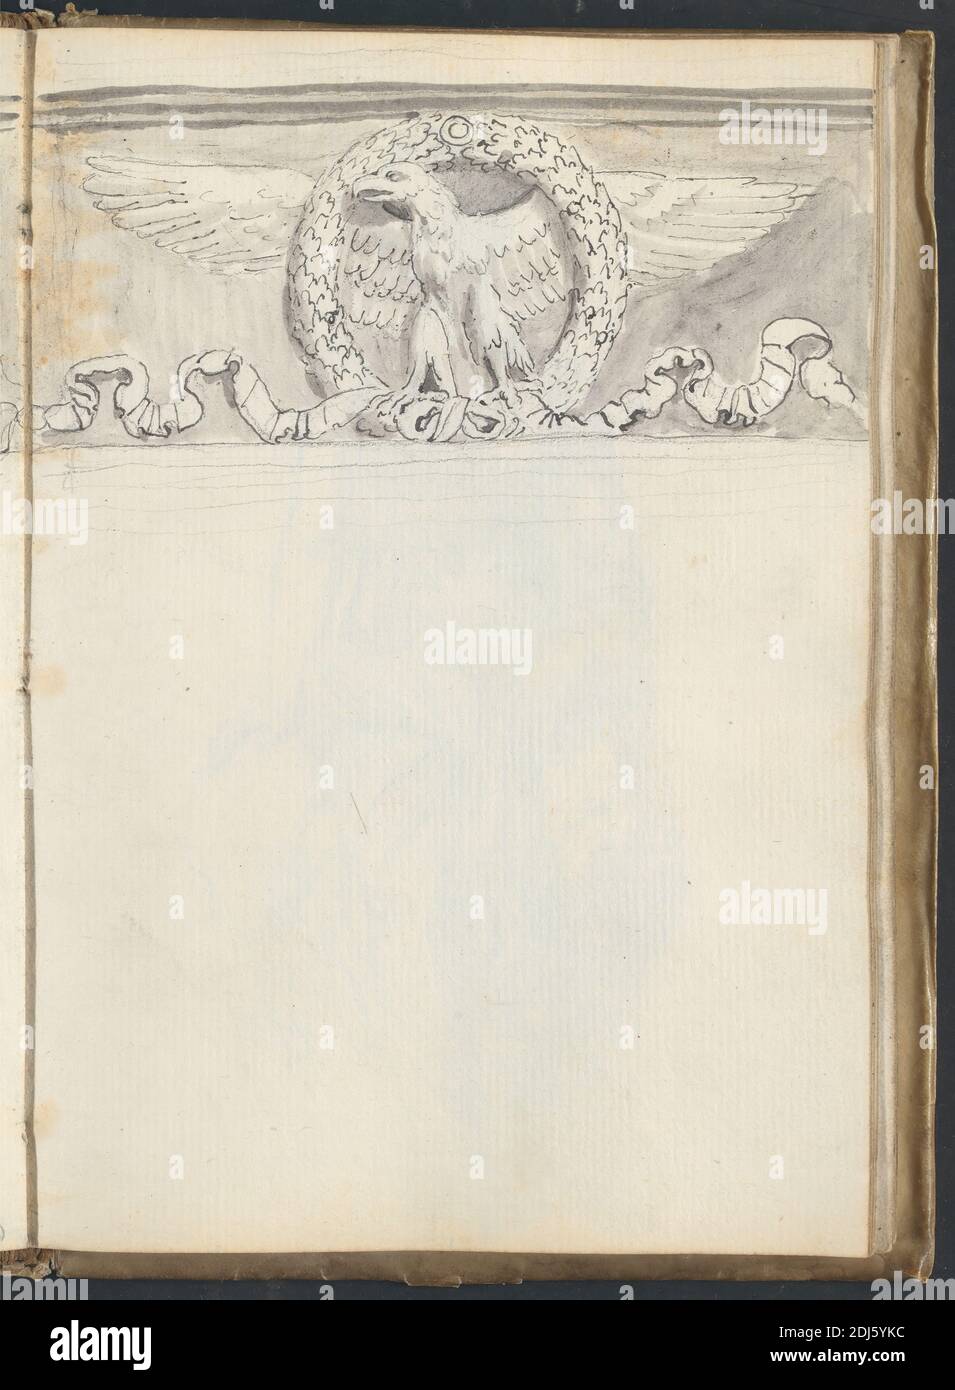 The Roman Imperial Eagle in an Oak Wreath, Church of SS. Apostoli, Rome, John Flaxman, 1755–1826, British, 1787, Graphite, pen and ink, and gray wash on medium, slightly textured, cream laid paper bound in vellum, Sheet: 8 5/8 x 6 inches (21.9 x 15.2 cm) and Spine: 9 inches (22.9 cm Stock Photo